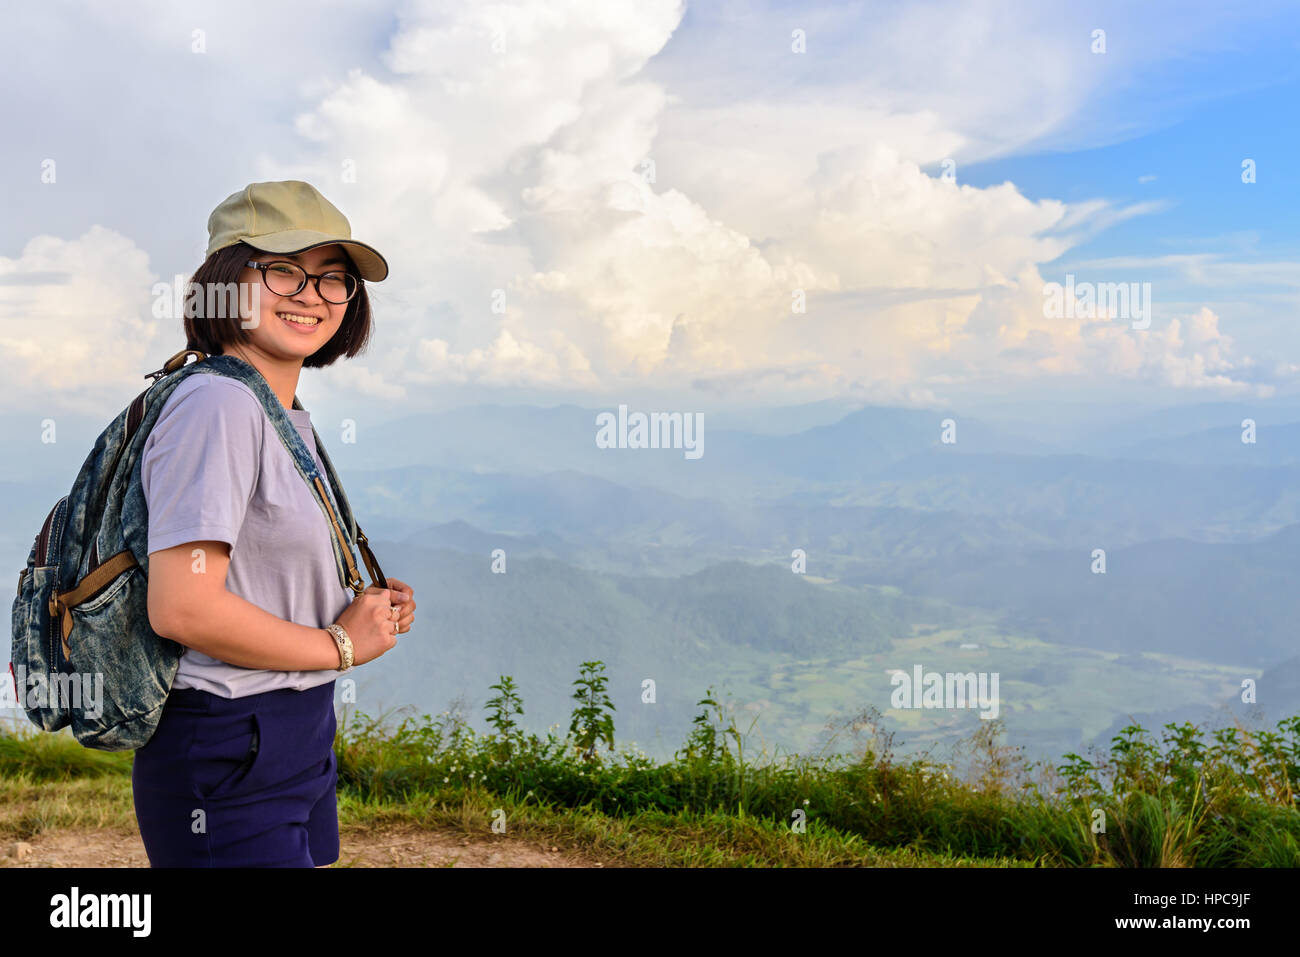 Teens girl hiker wear a cap and glasses with backpack is standing and smiling happily on high mountain at scenic point of Phu Chi Fa Forest Park Stock Photo